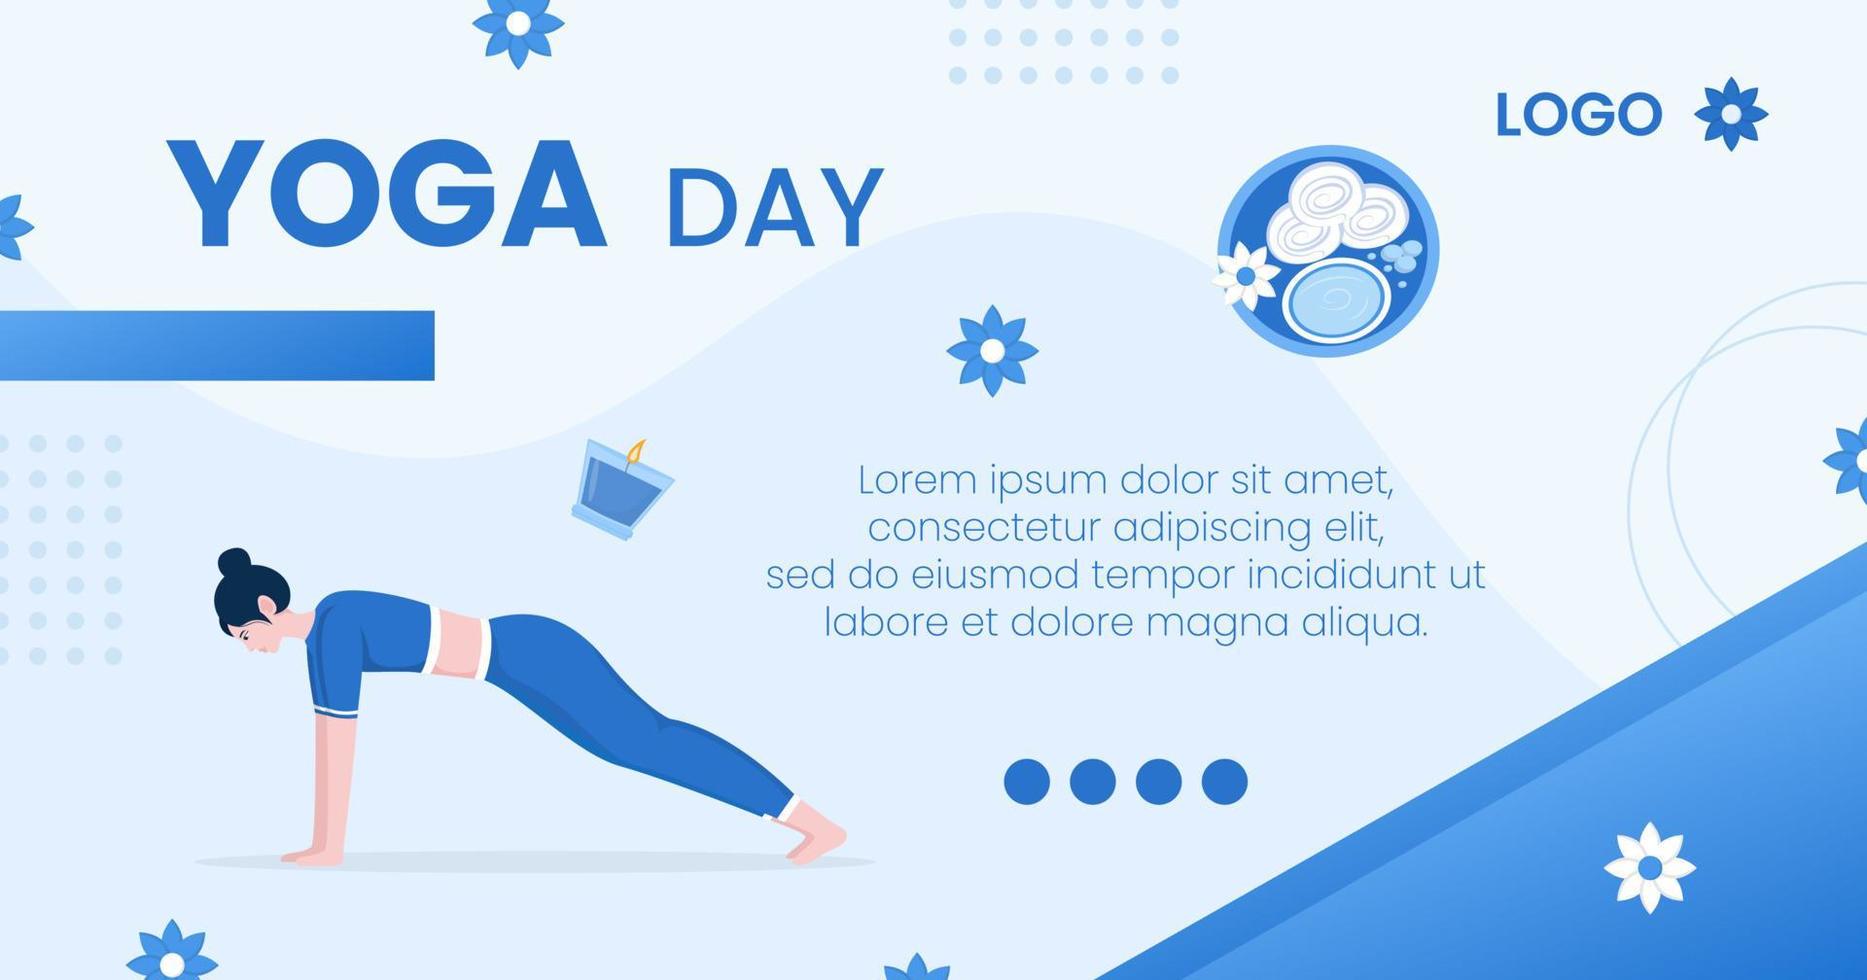 Yoga and Meditation Post Editable of Square Background Illustration Suitable for Social media, Feed, Card, Greetings, Print and Web Internet Ads vector